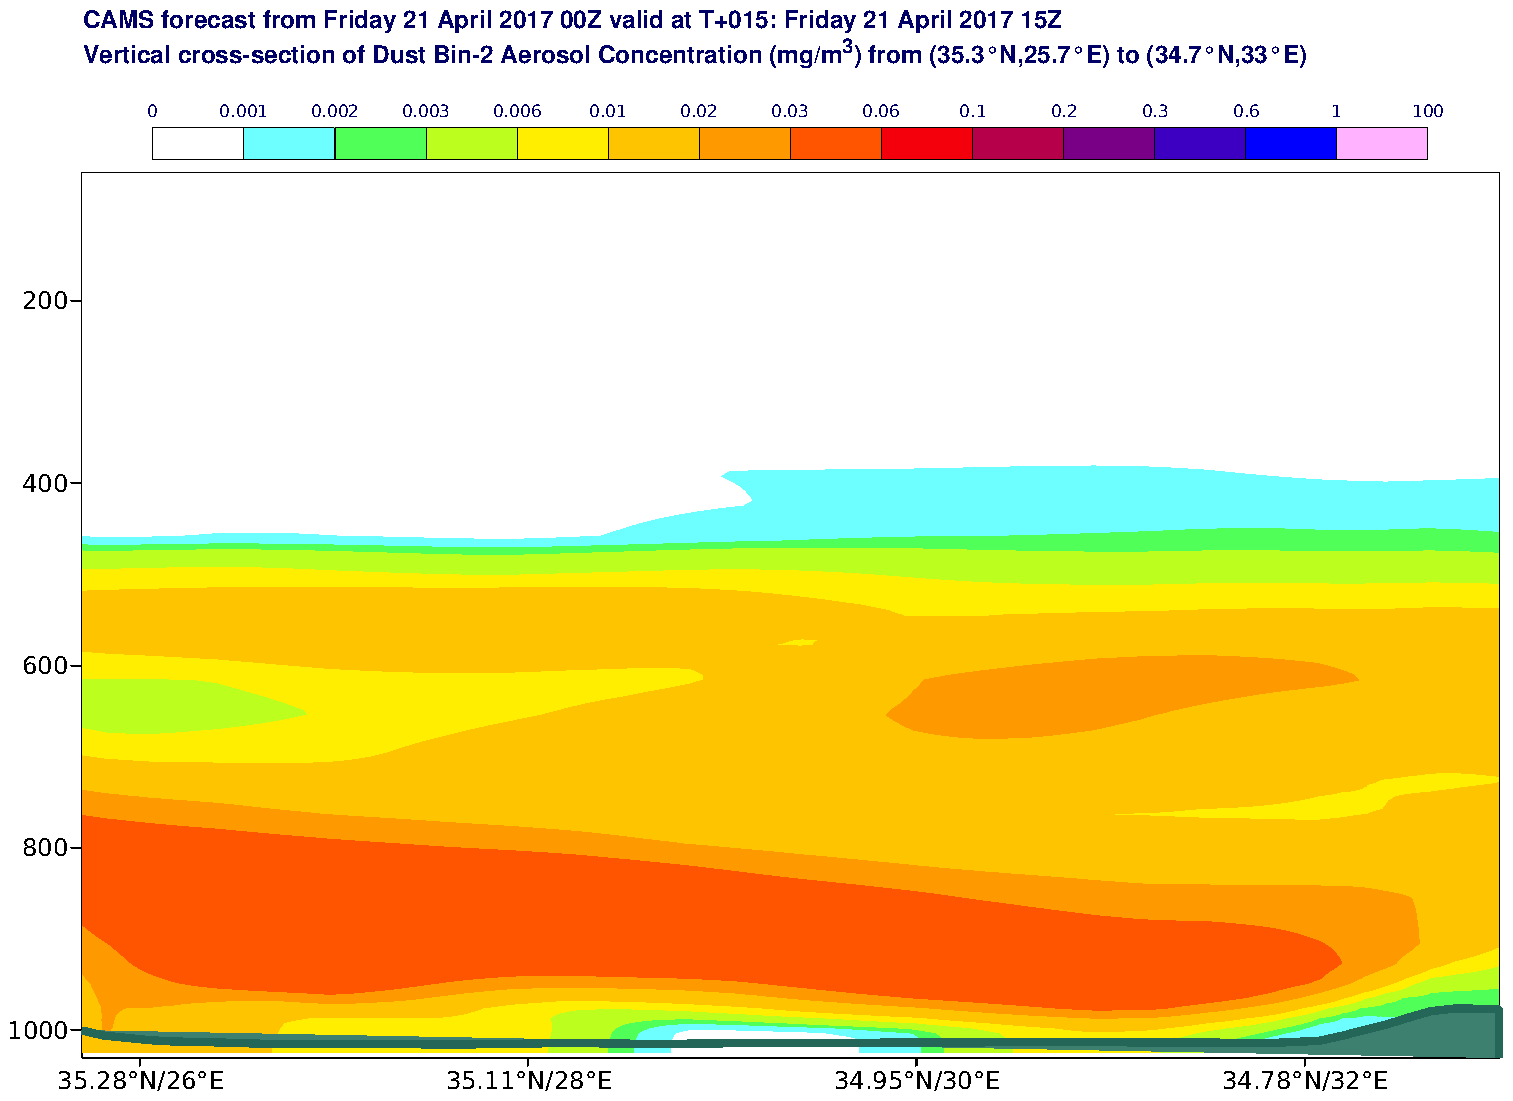 Vertical cross-section of Dust Bin-2 Aerosol Concentration (mg/m3) valid at T15 - 2017-04-21 15:00